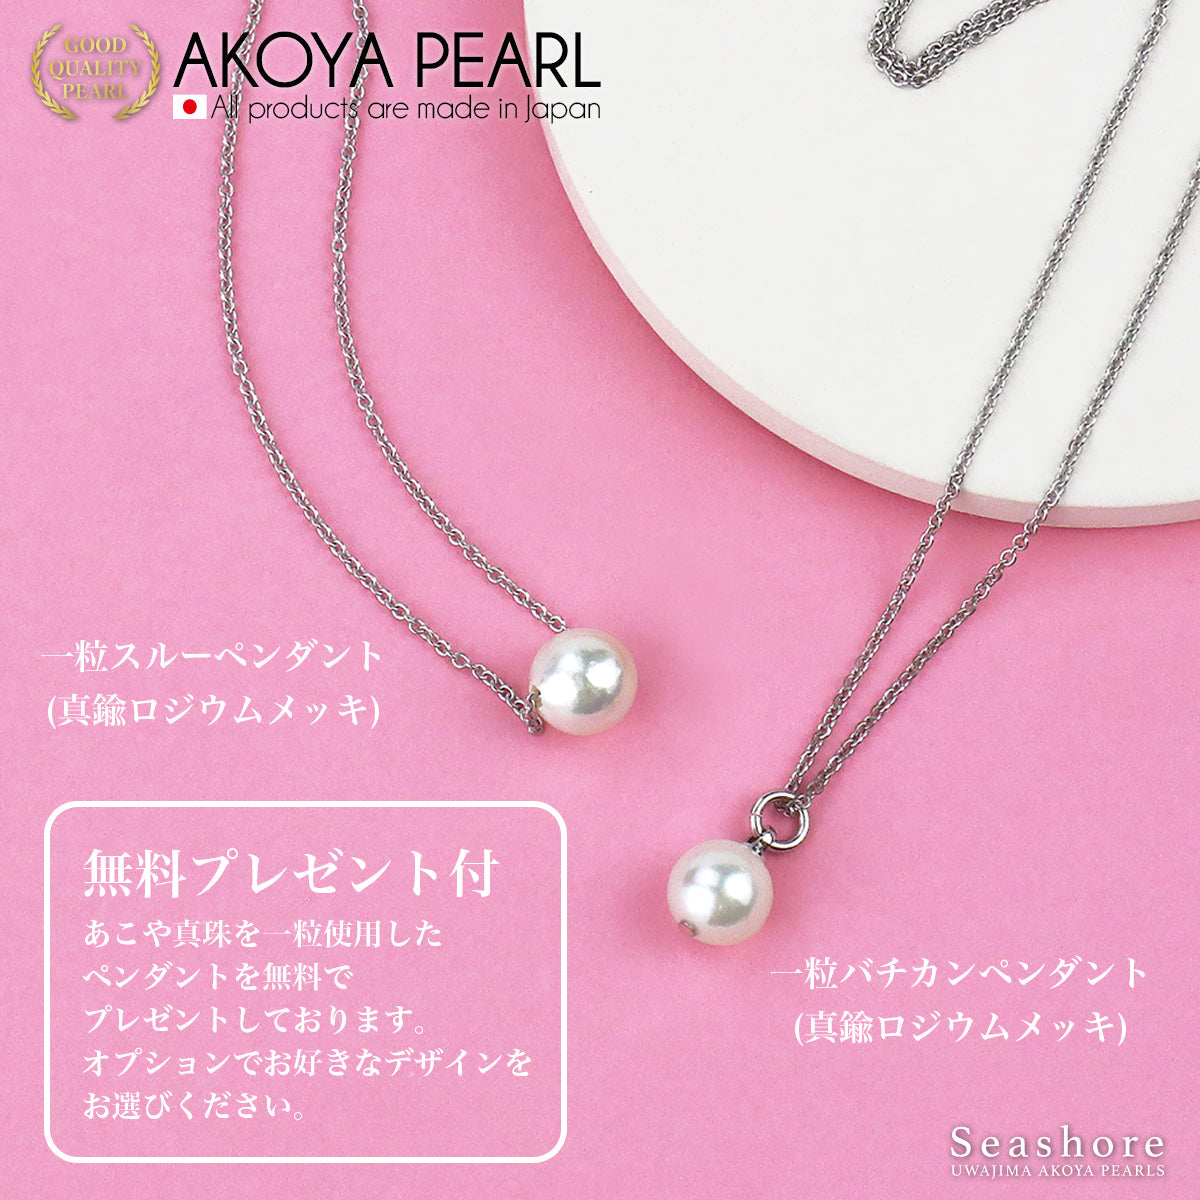 Hanadama Pearl Single Through Necklace [8.0-9.0mm] SV925 Venetian Chain Akoya Pearl Comes with Gray Storage Case and Authenticity Card (3823)